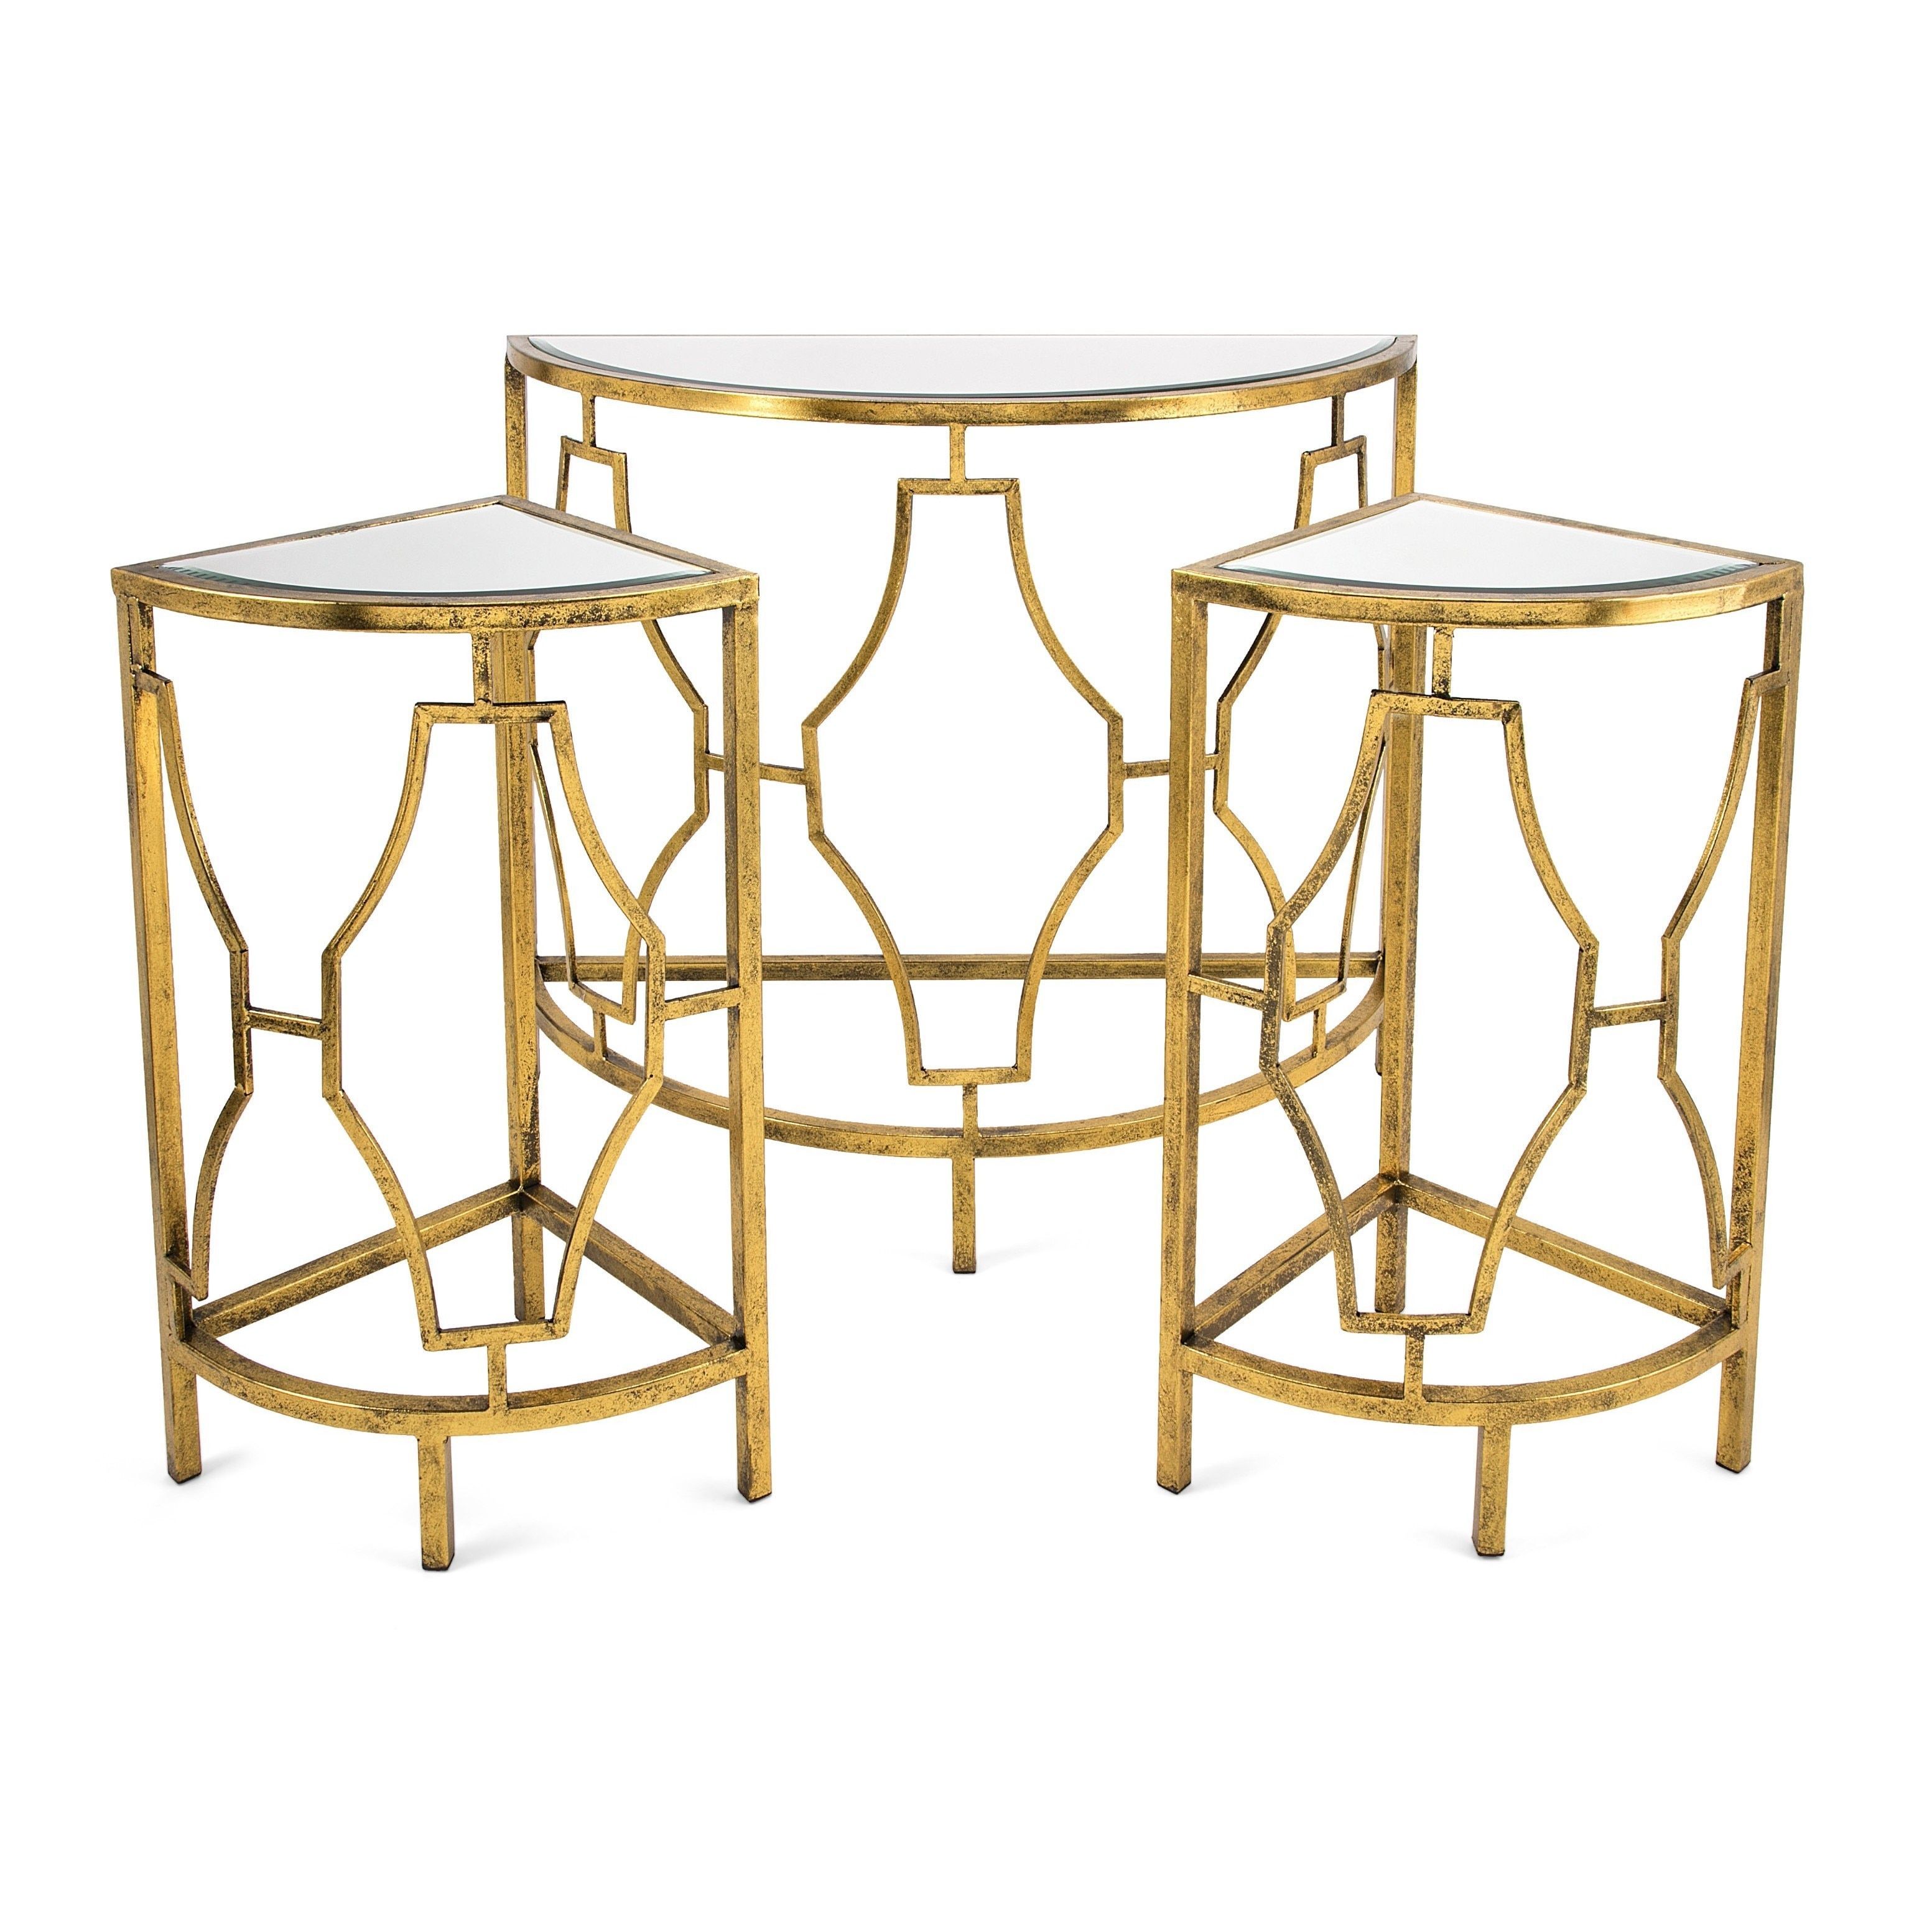 imax manchester gold mirror accent tables set occasional mirrored table cocktail linens sheesham wood end childrens outdoor furniture antique square coffee cushions ashley glass